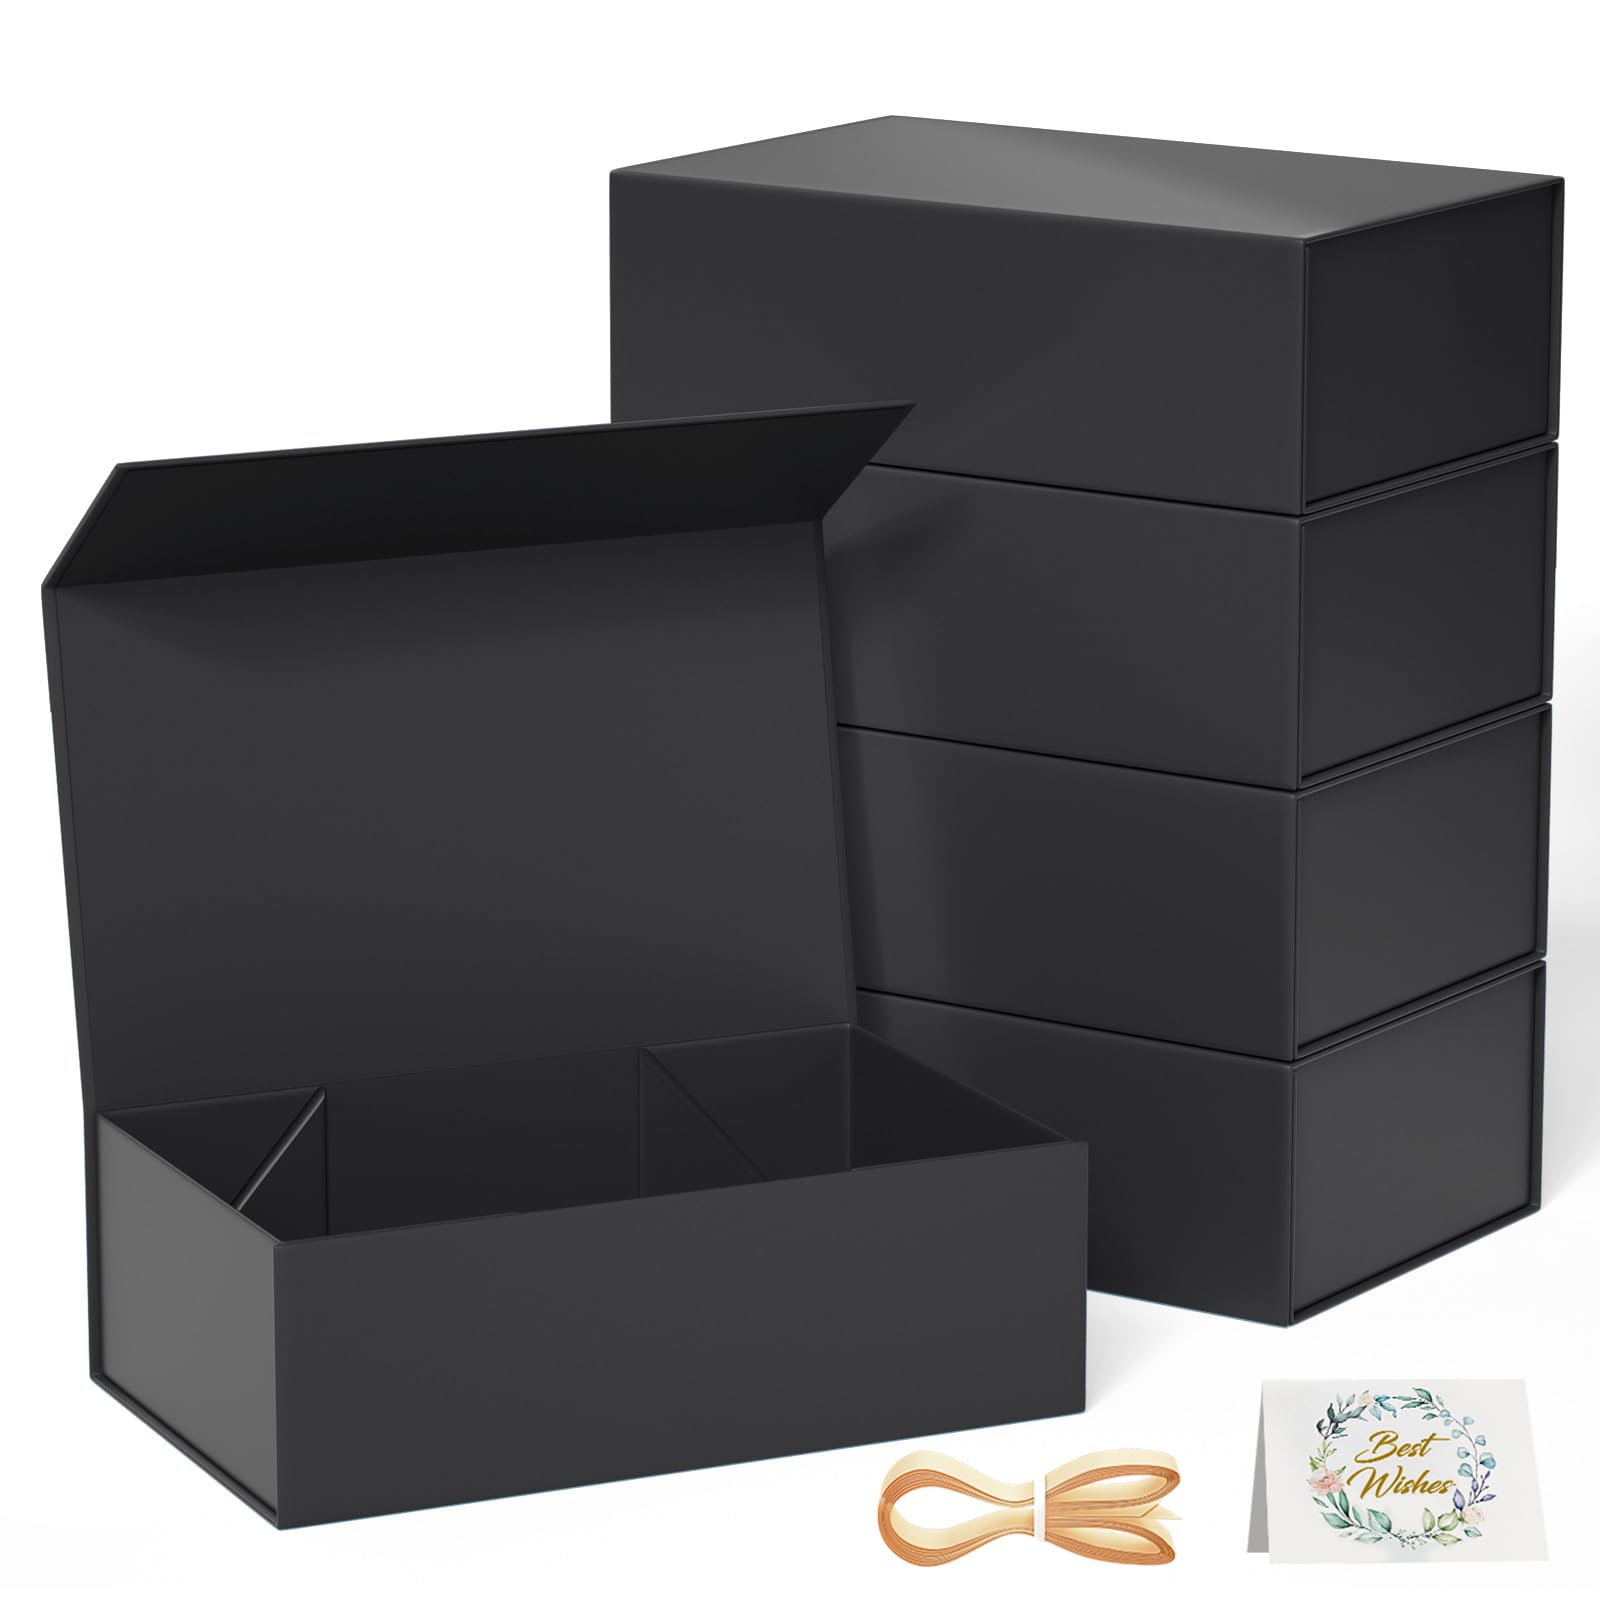 Black Gift Box for Presents with Lids Magnetic Closure Rectangle Collapsible for Groomsman Proposal Box, Wedding, Christmas, Halloween, Birthday Gift Packging